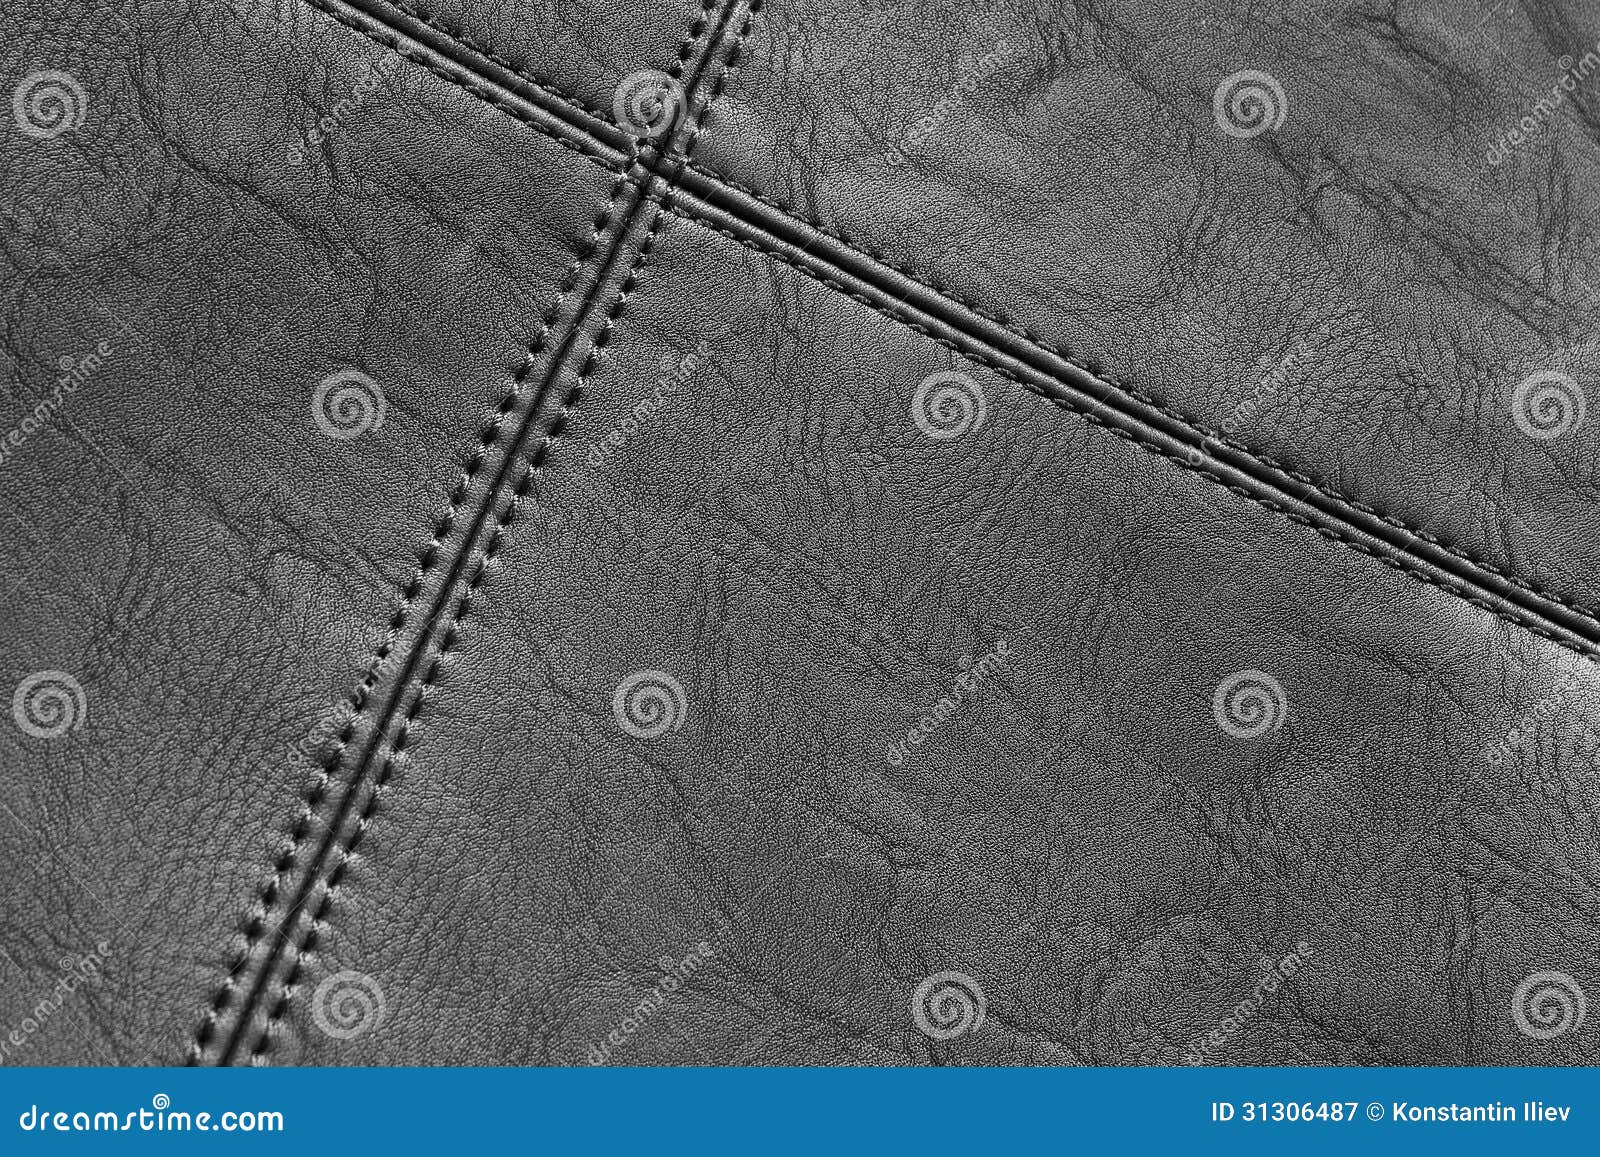 Texture of leather stock image. Image of detail, black - 31306487